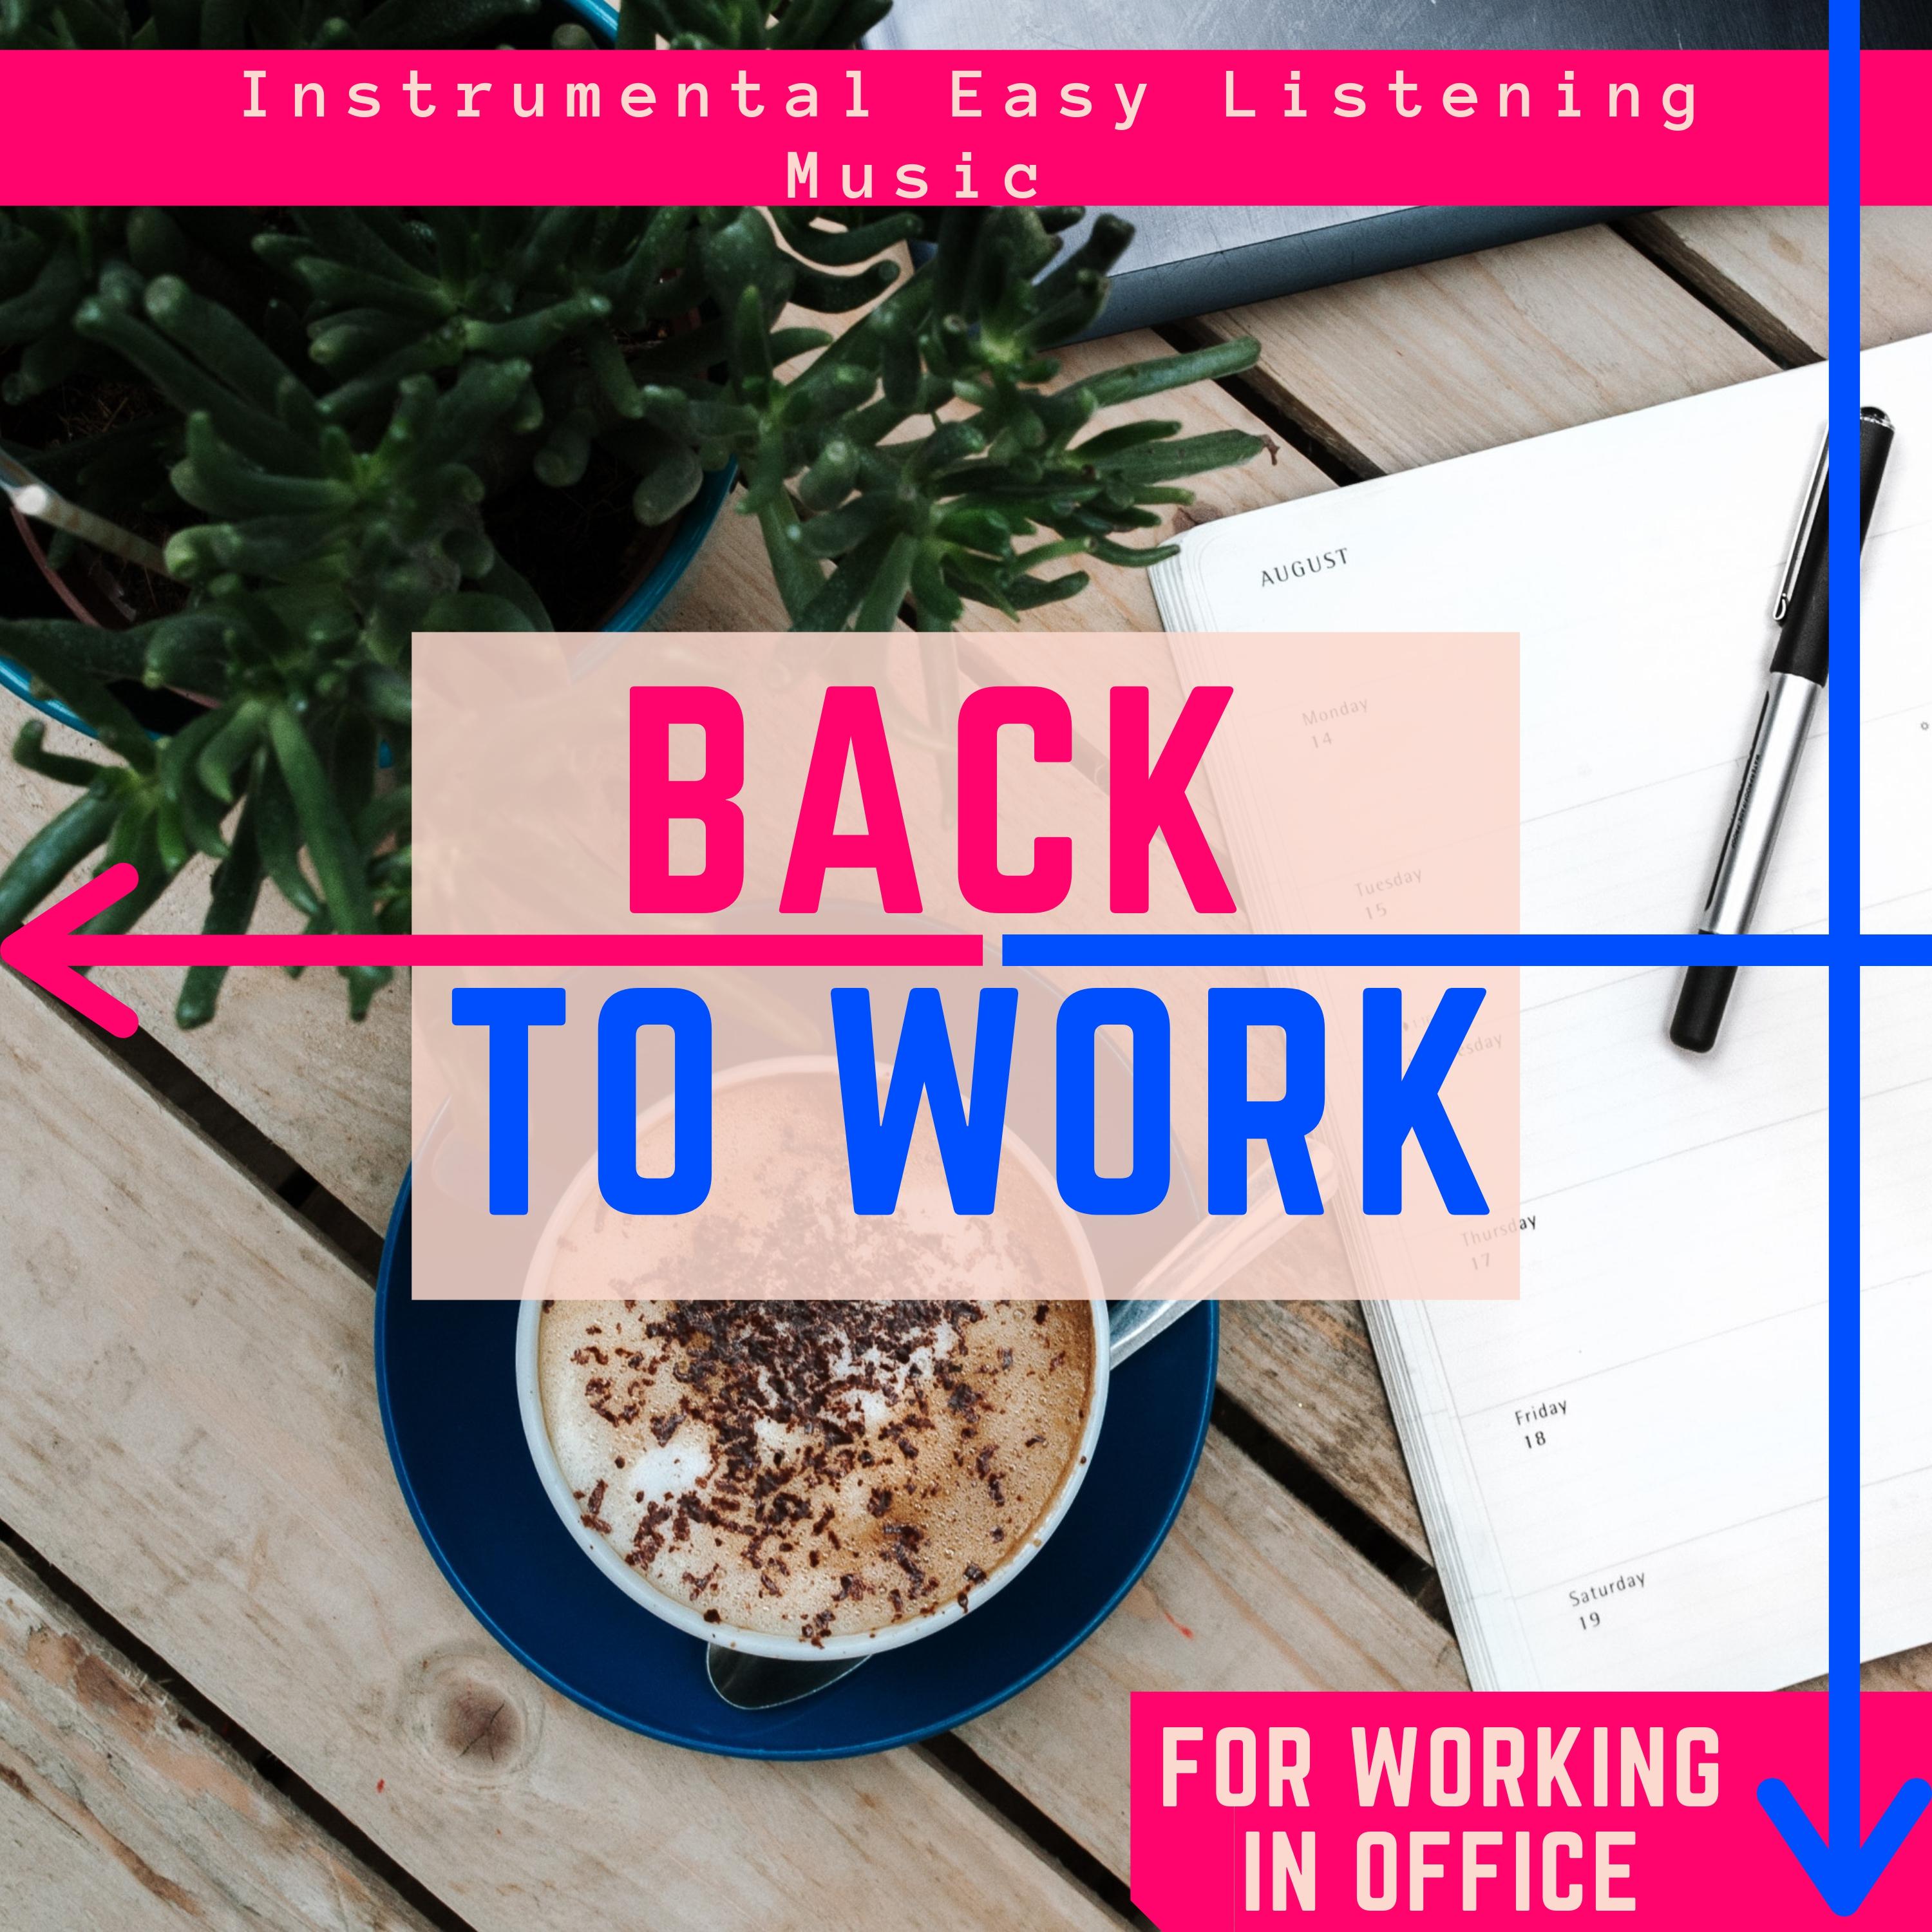 Back to Work - Instrumental Easy Listening Music for Working in Office